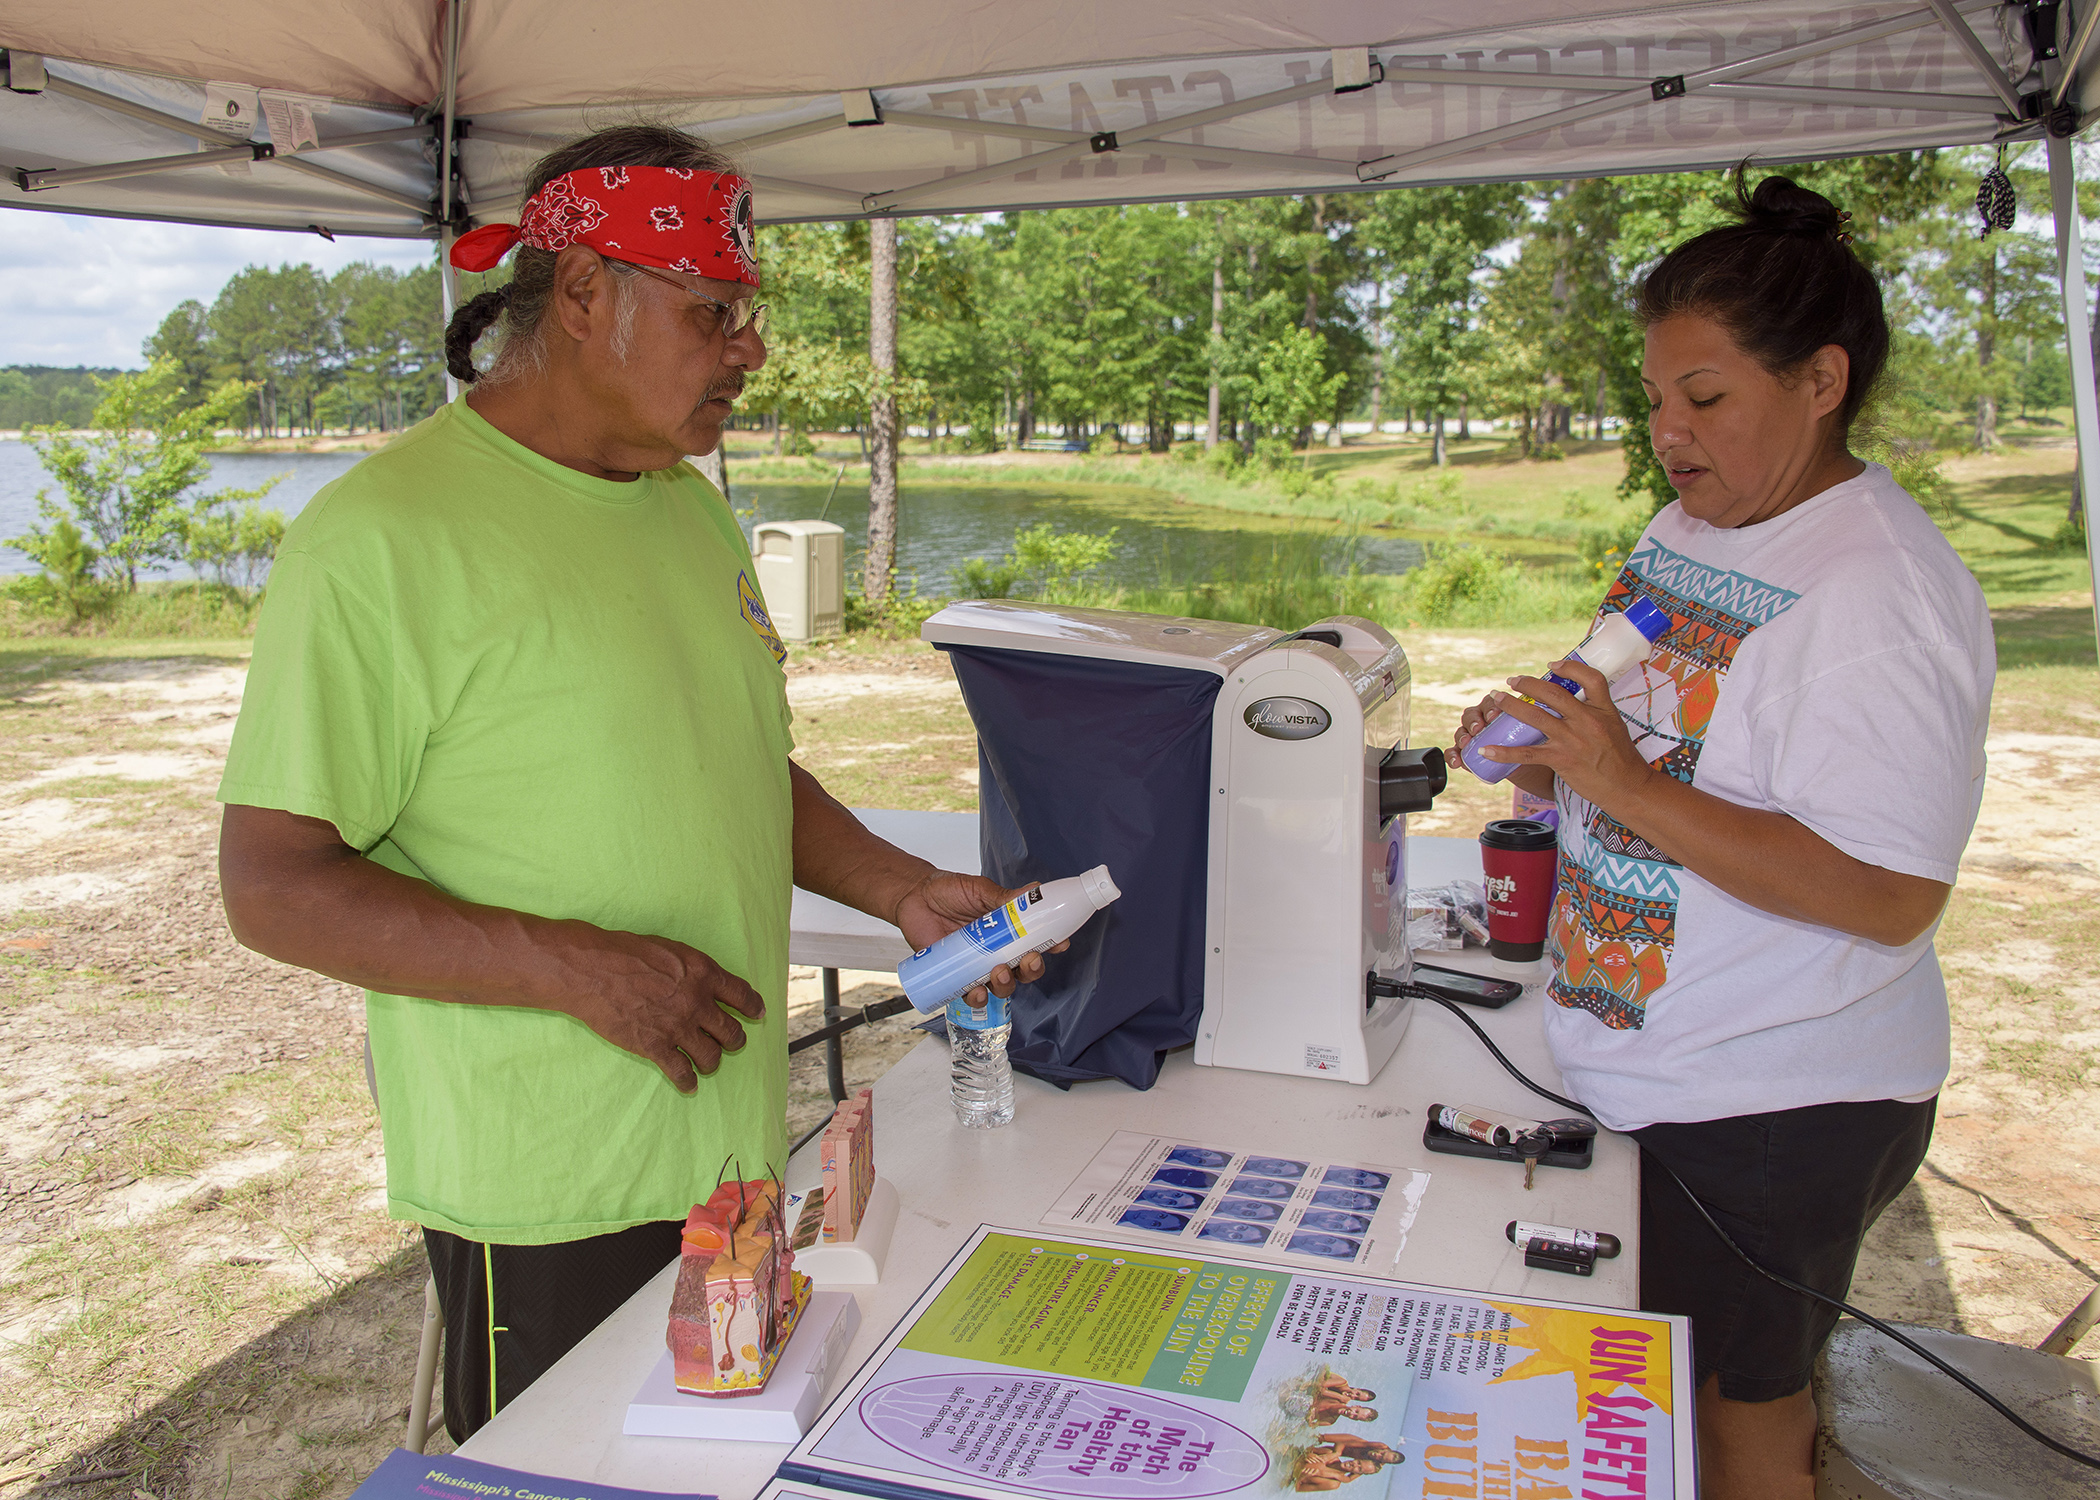 Ricky Willis learns about sun safety from Candy Jimmie at the May 28 boating event at Lake Pushmataha in Neshoba County, Mississippi. (Photo by MSU Extension Service/Kevin Hudson)